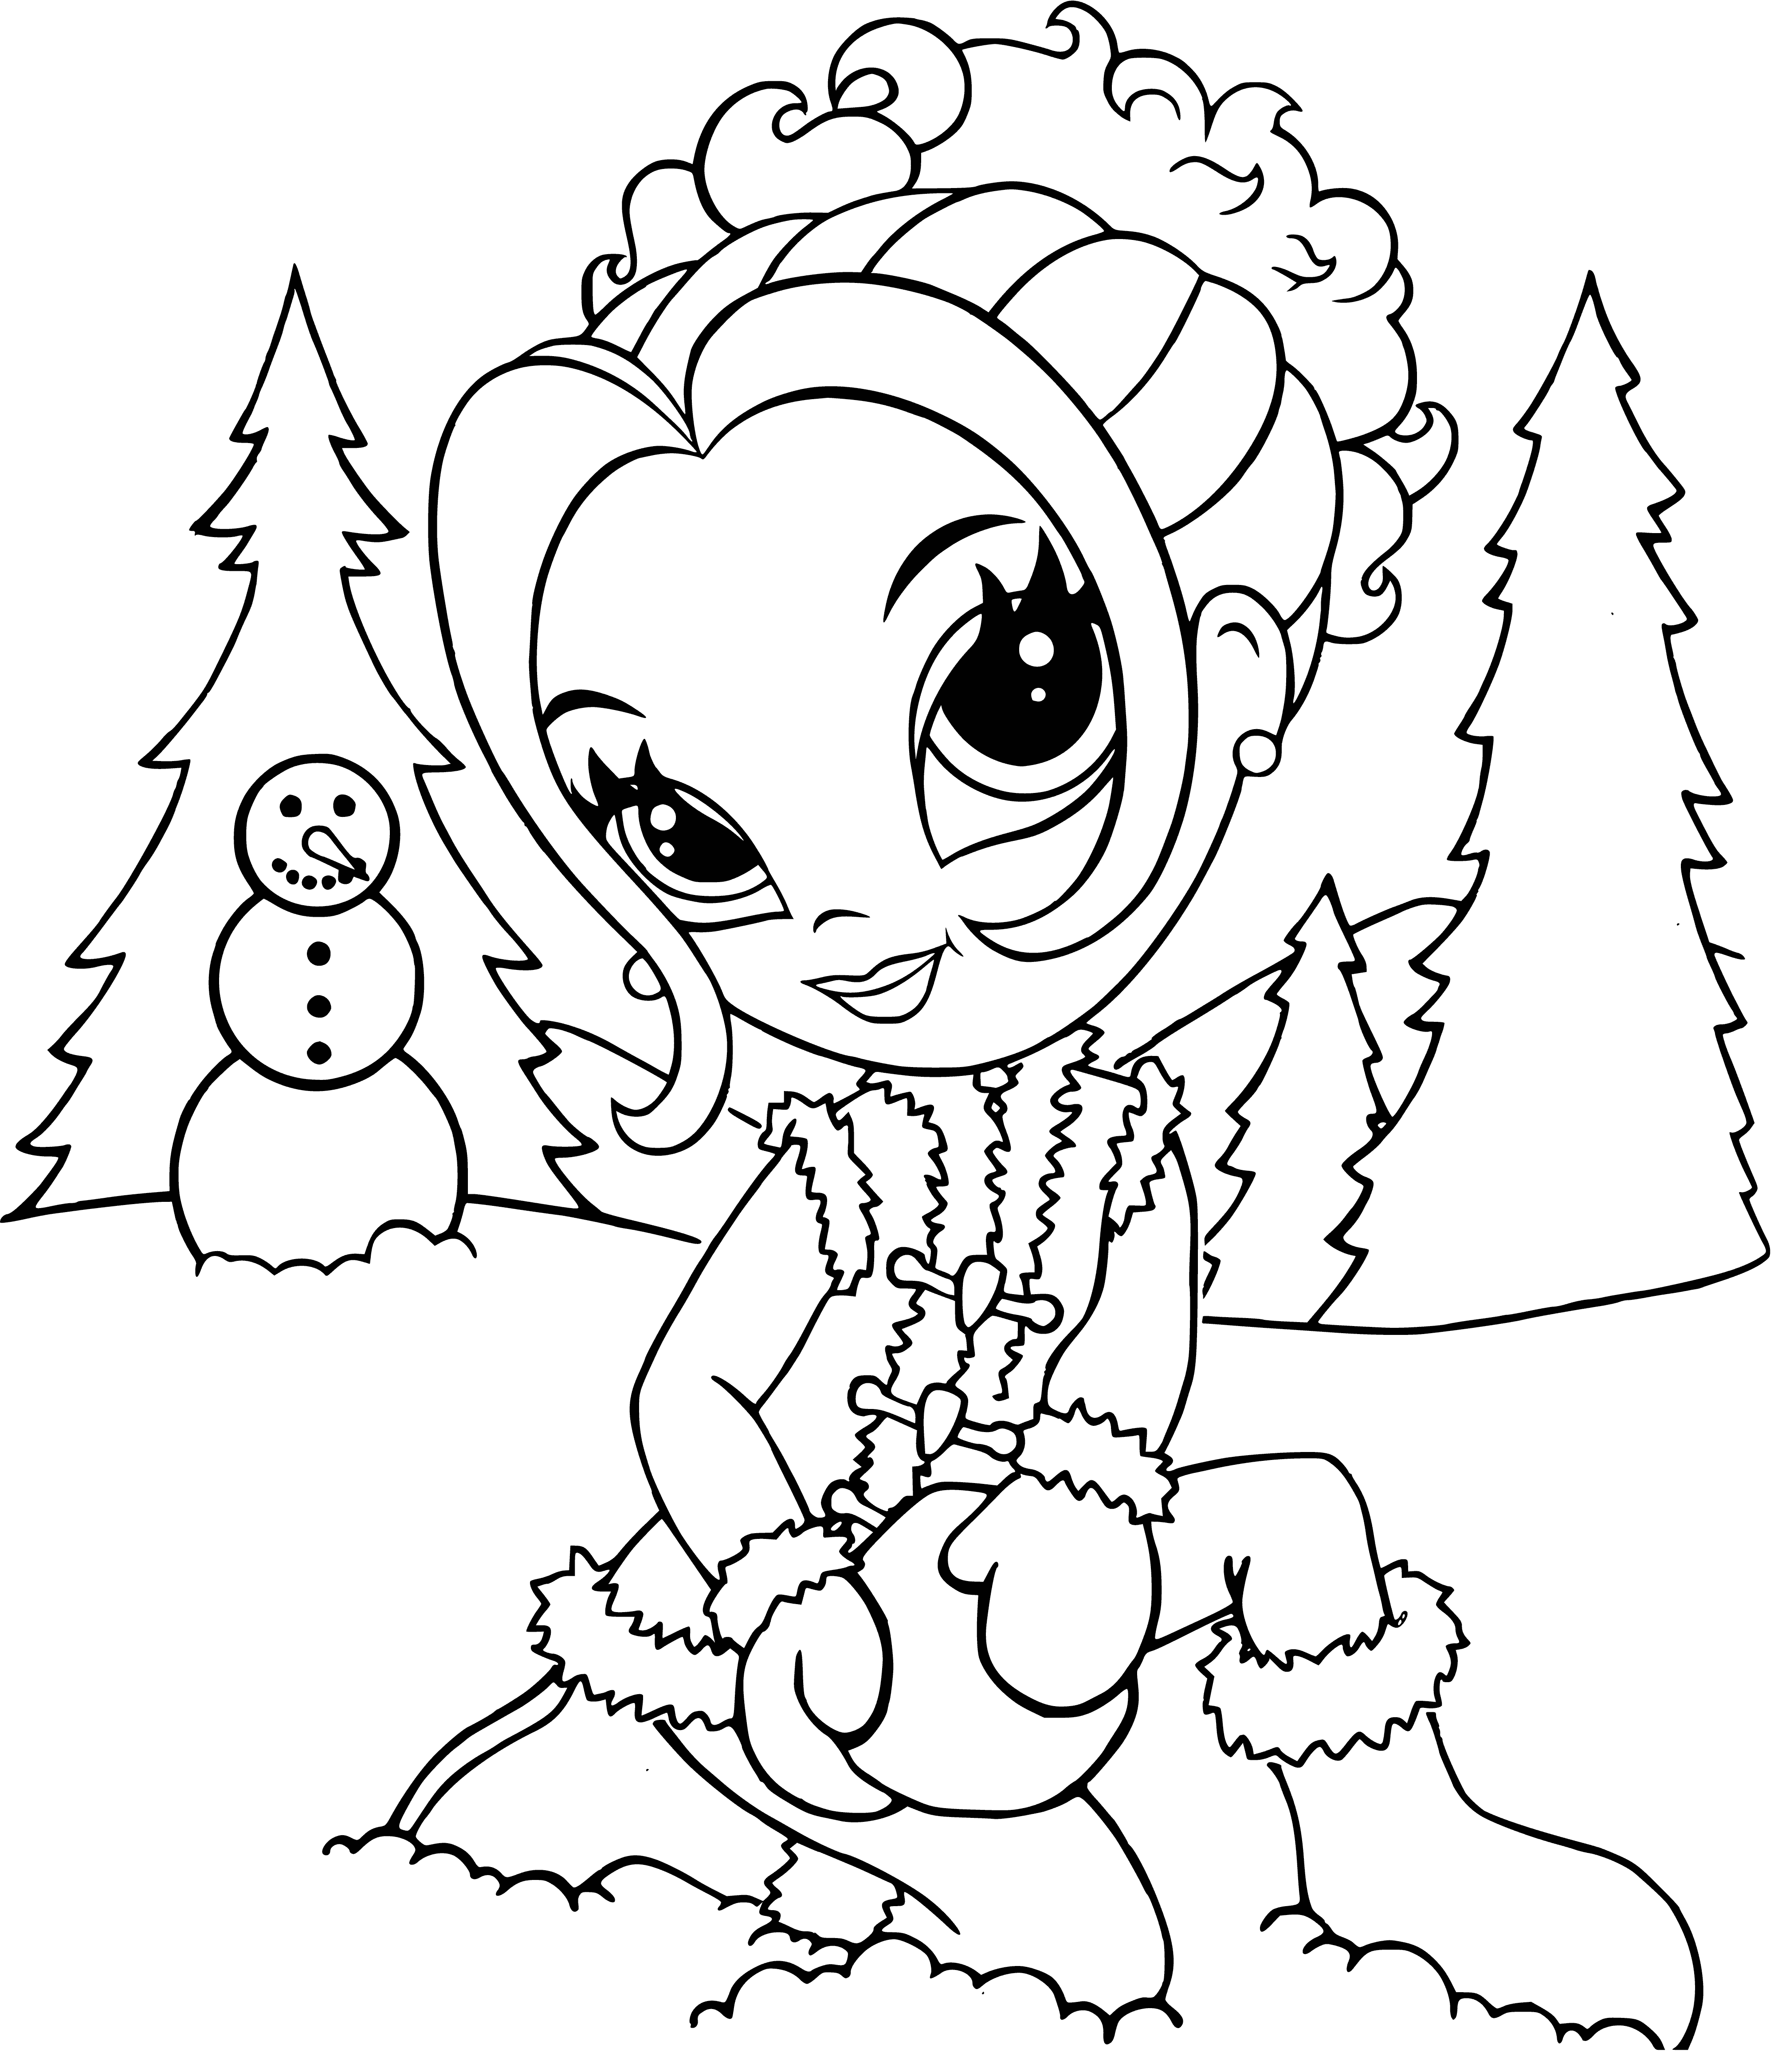 coloring page: A glamorous girl in pink with a purse and flower epitomizes the Lisa Frank Glamour Girl.